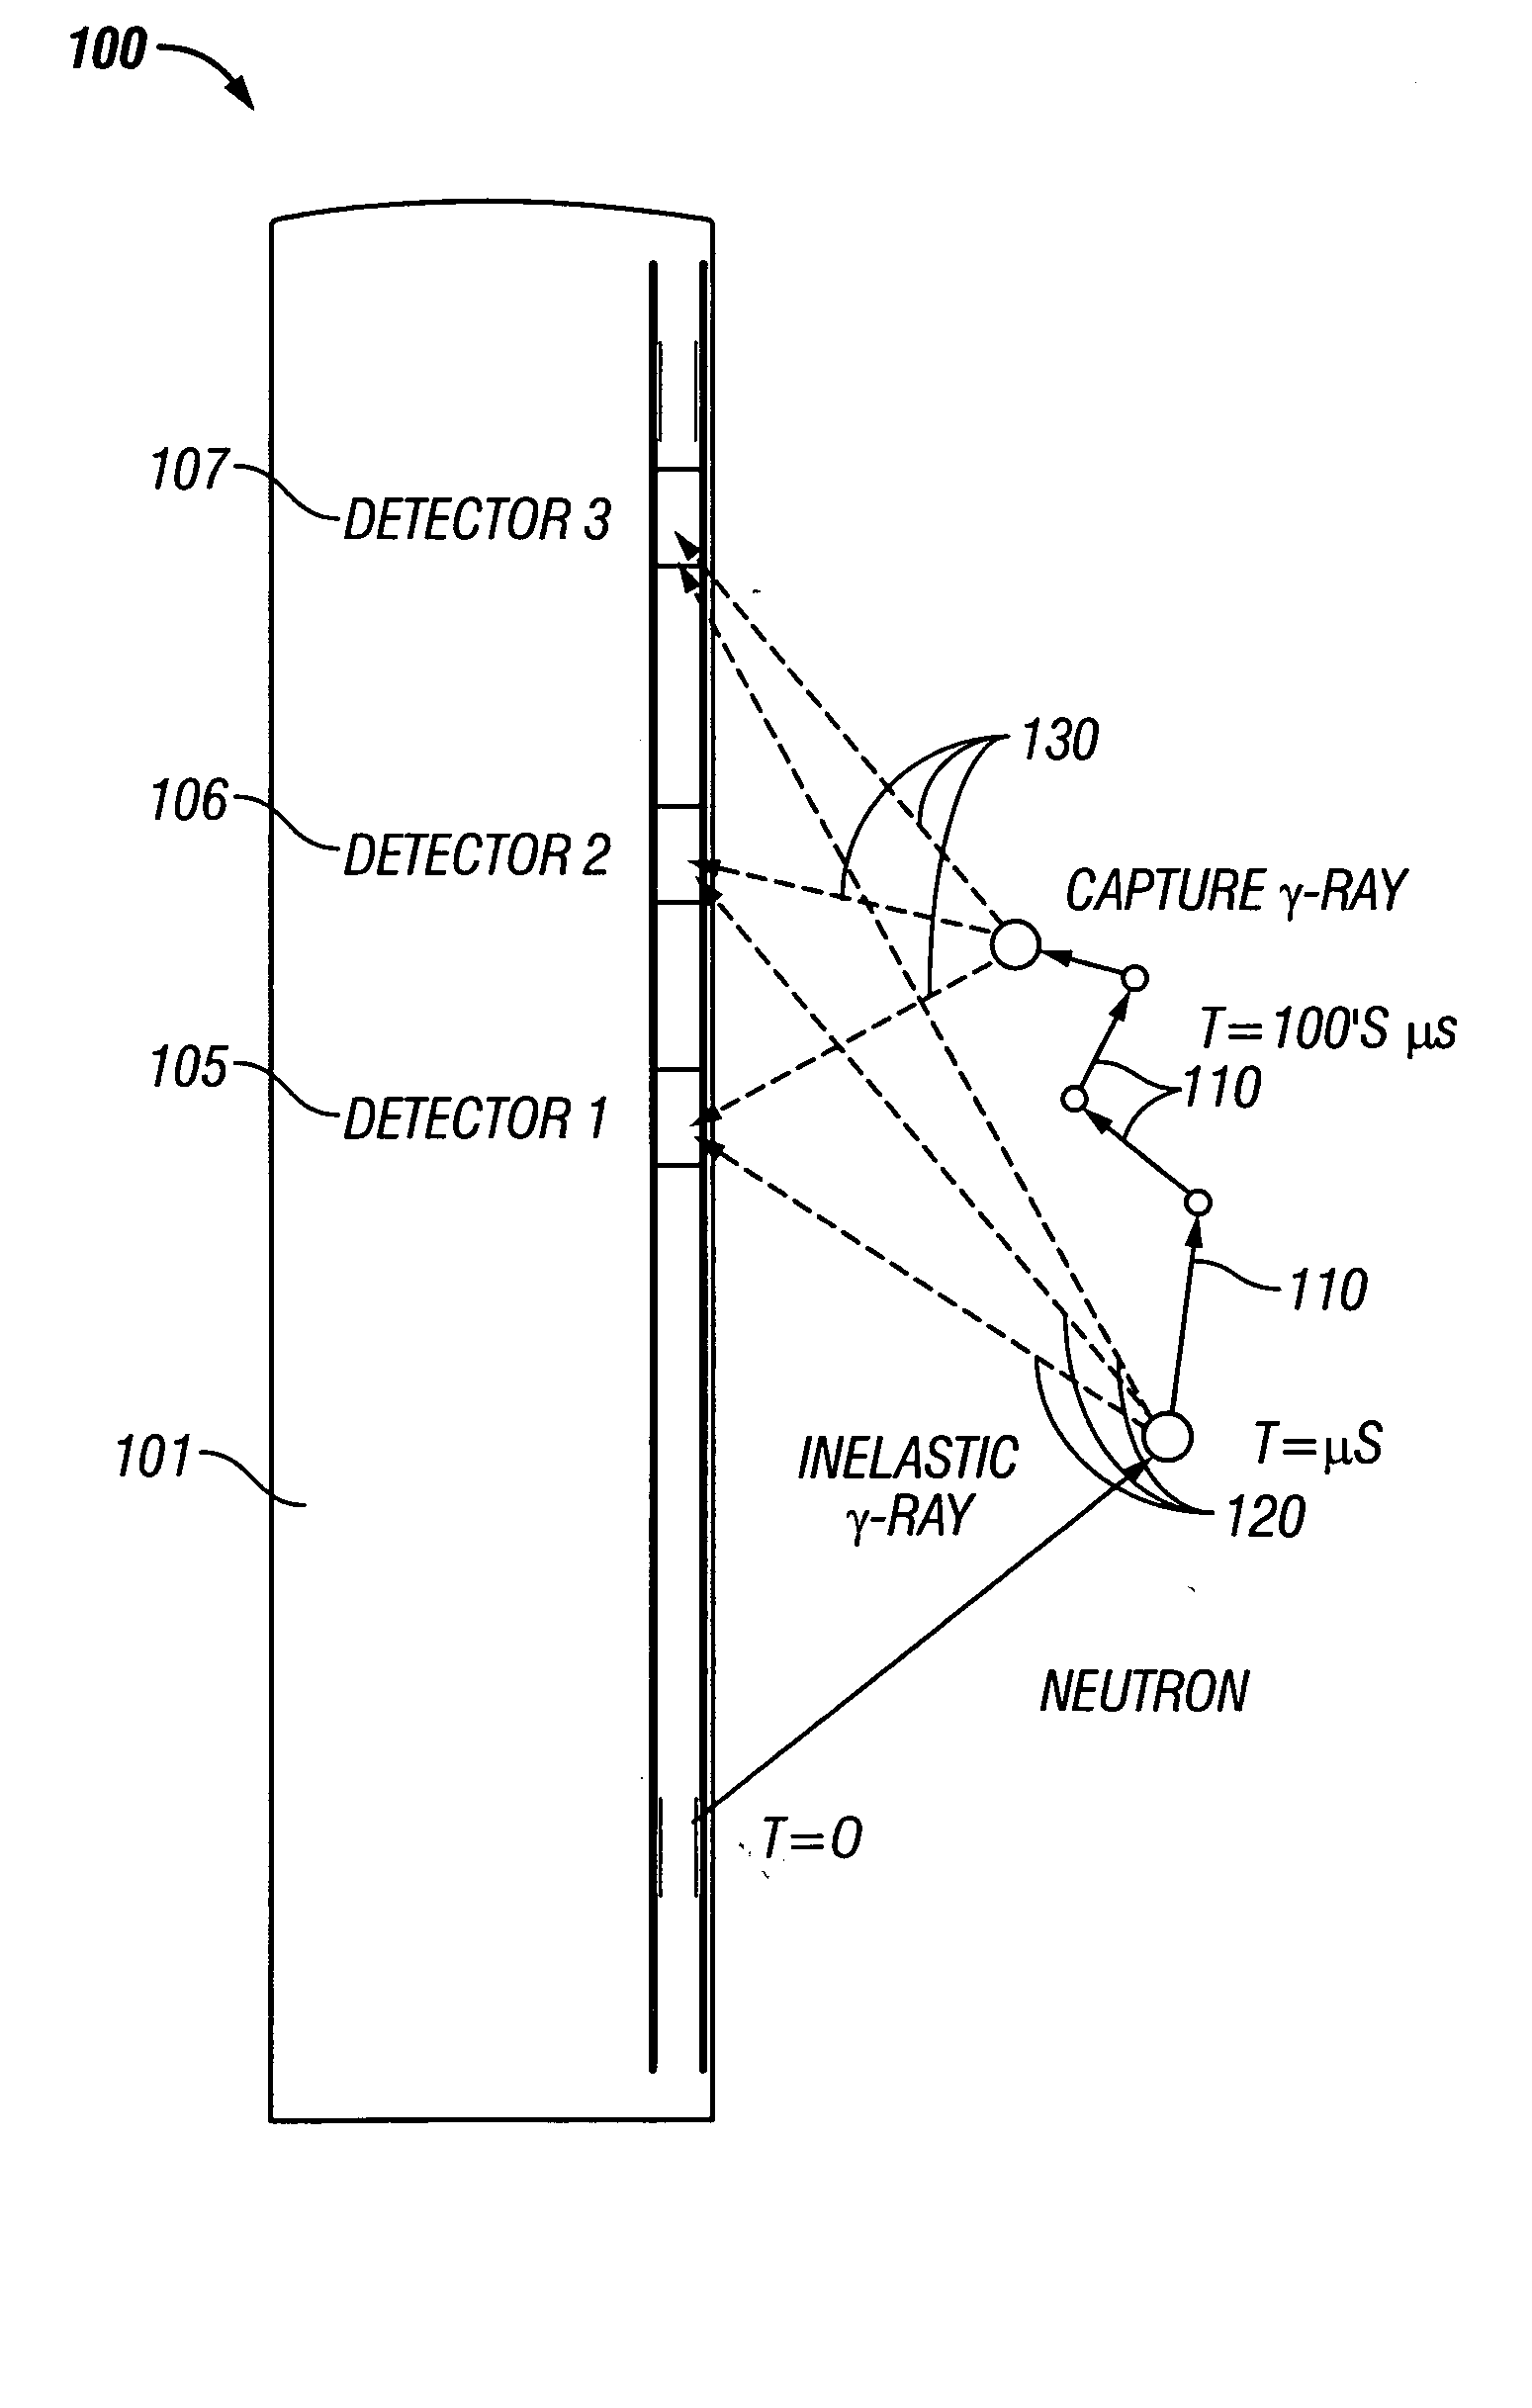 Apparatus and method for determining thermal neutron capture cross section of a subsurface formation from a borehole using multiple detectors